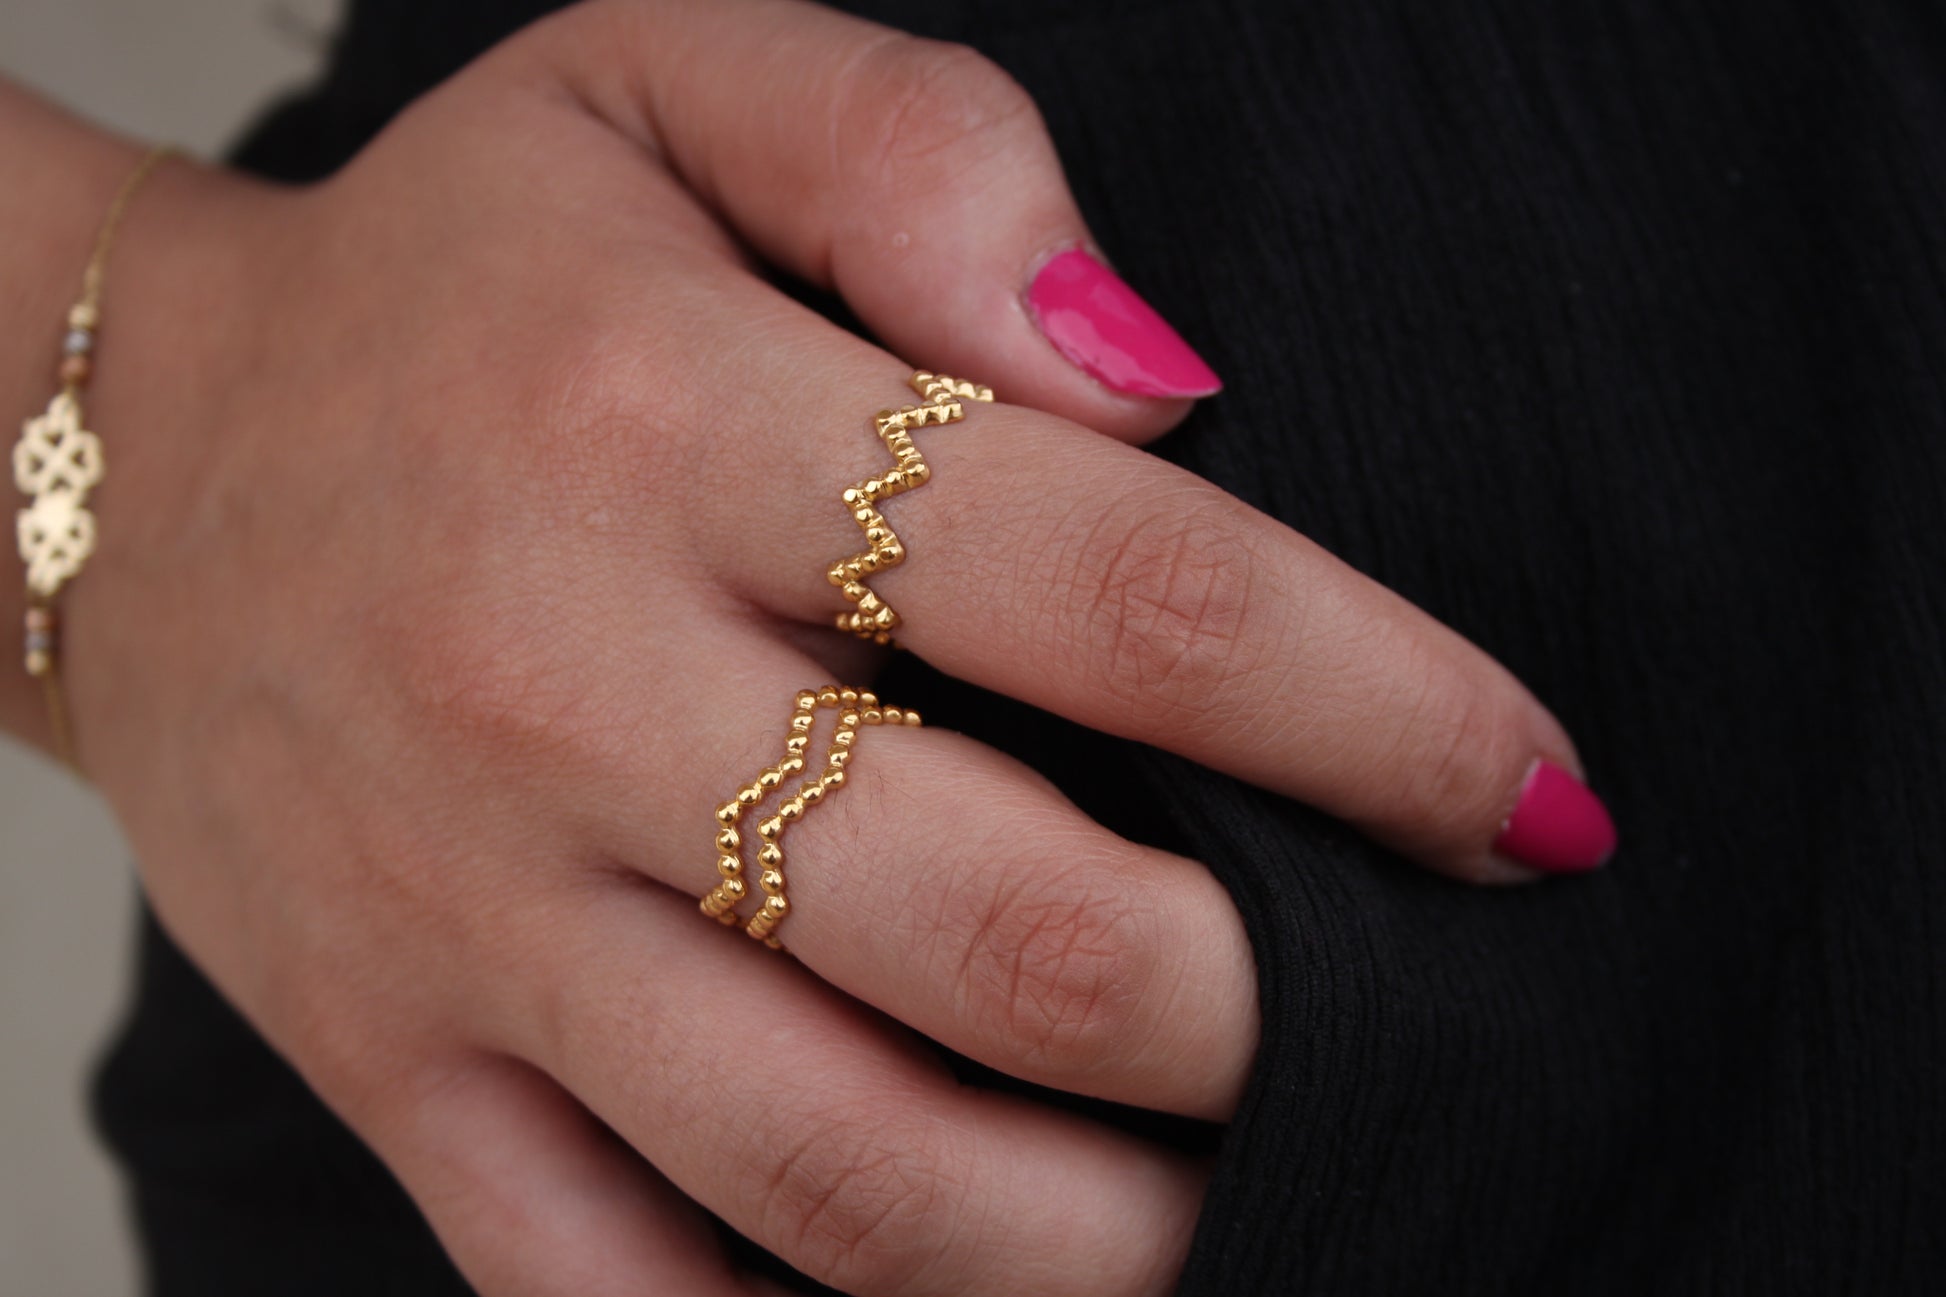 Zig-ZagThe Zig Zag Ring is a stylish and modern accessory plated in 18k gold. This ring features a unique zig zag pattern that adds a contemporary and eye-catching element Stainless SteelZig-Zag